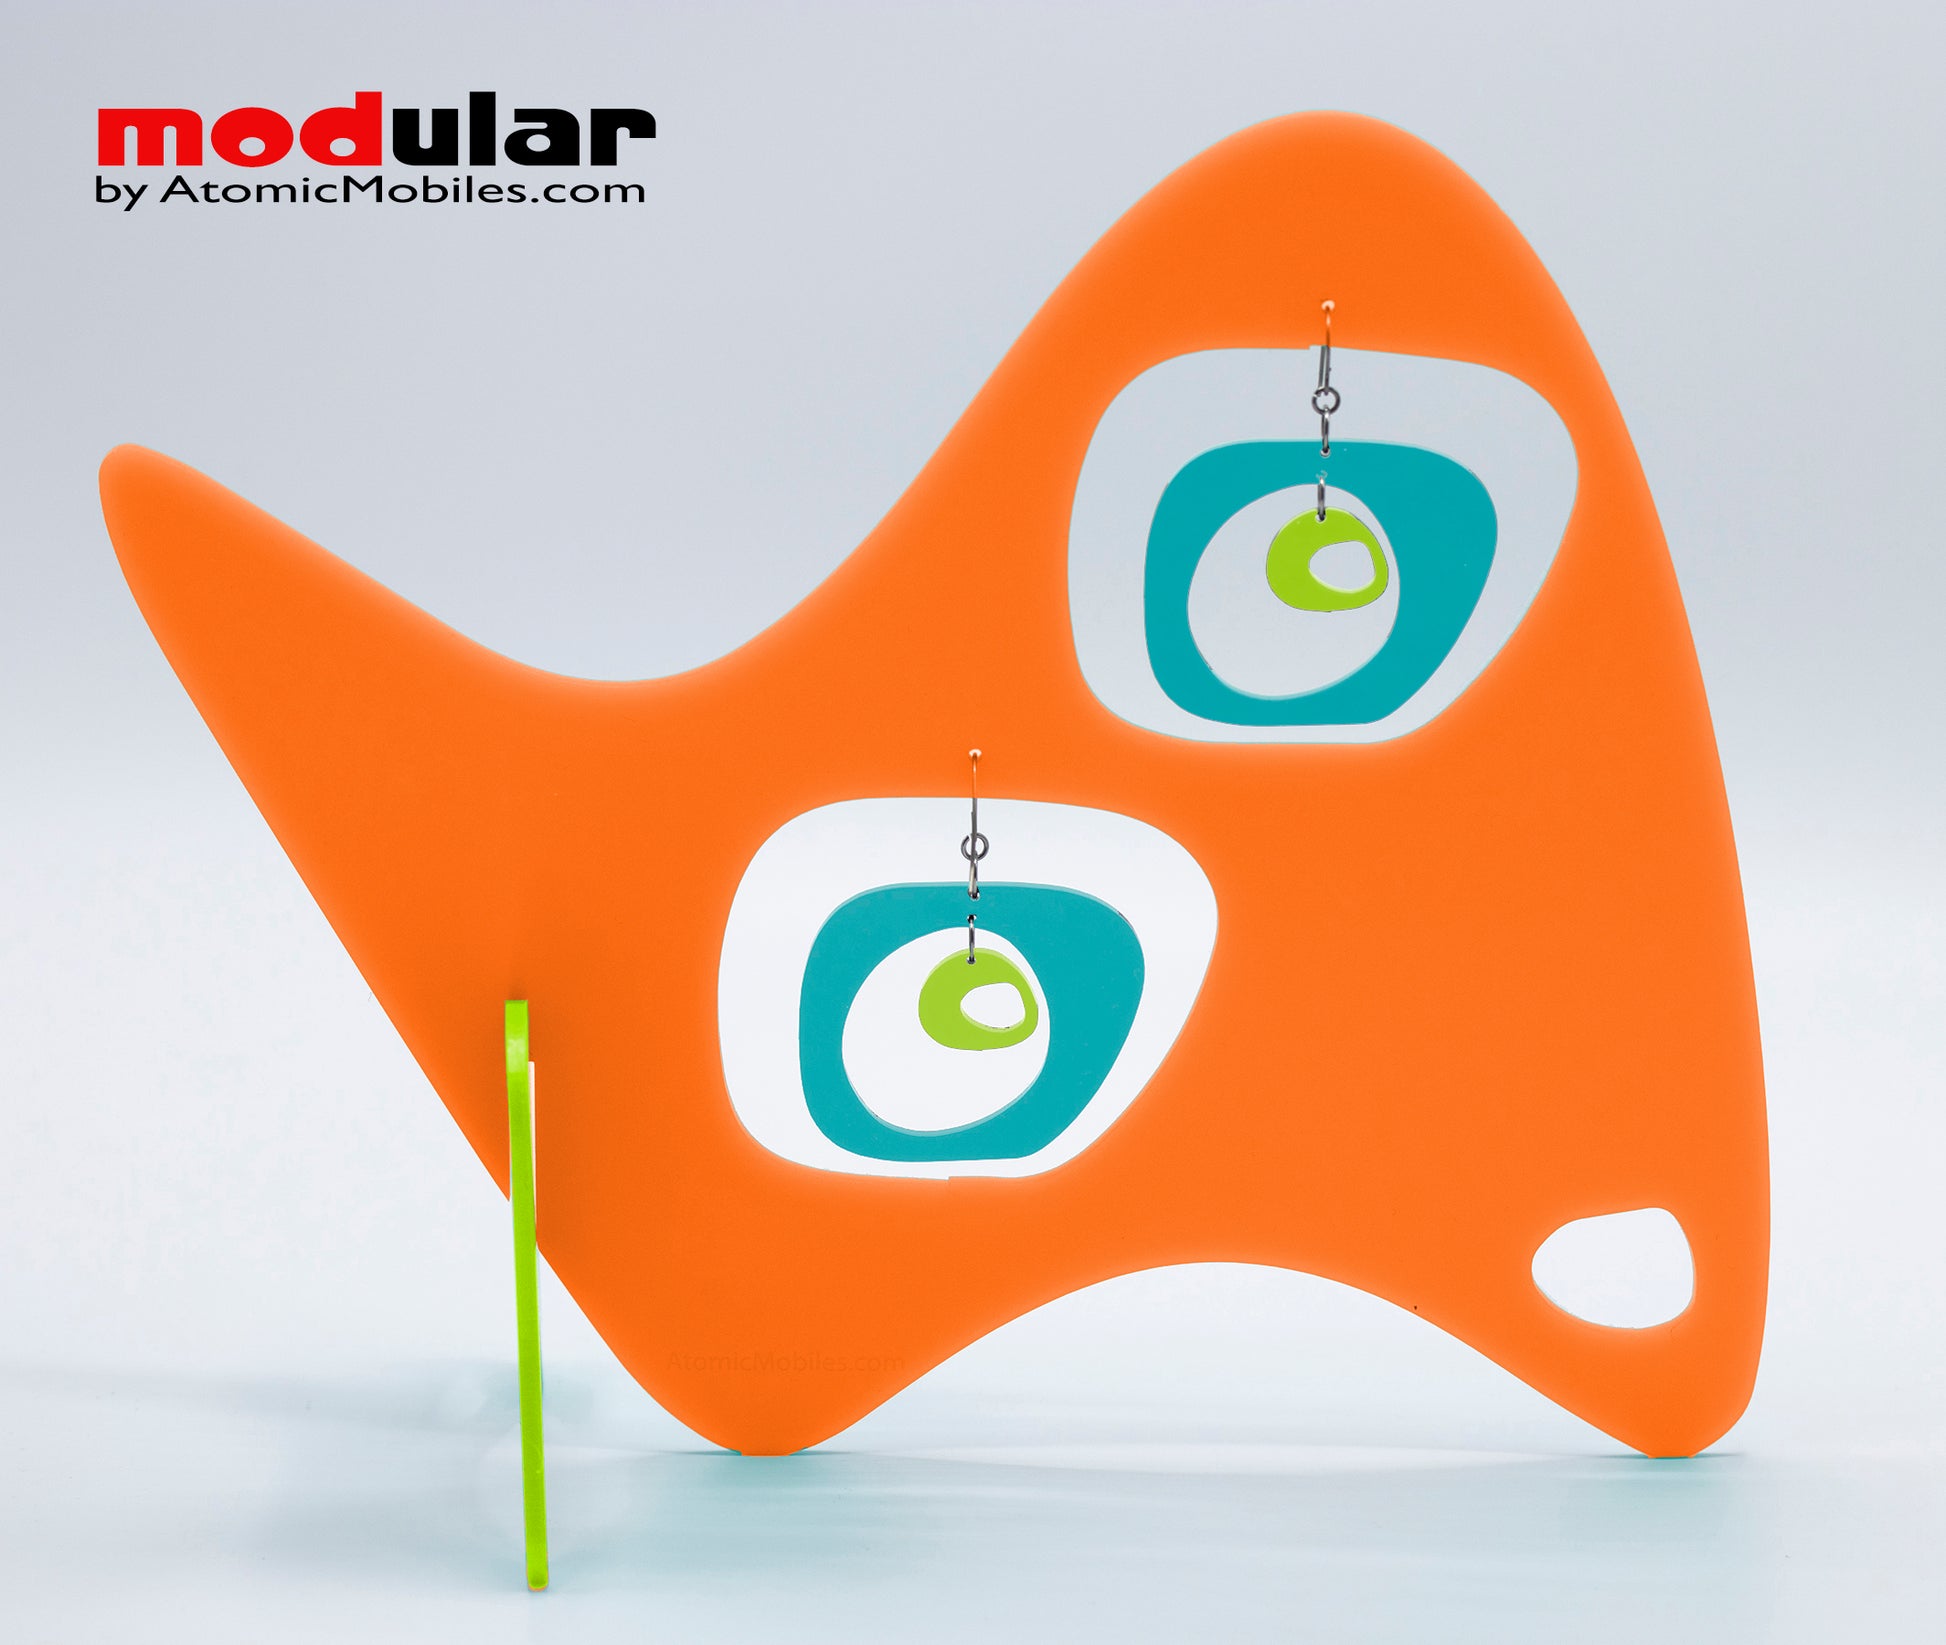 Handmade Paris retro mid century style earrings and stabile kinetic modern art sculpture in Orange Aqua and Lime by AtomicMobiles.com